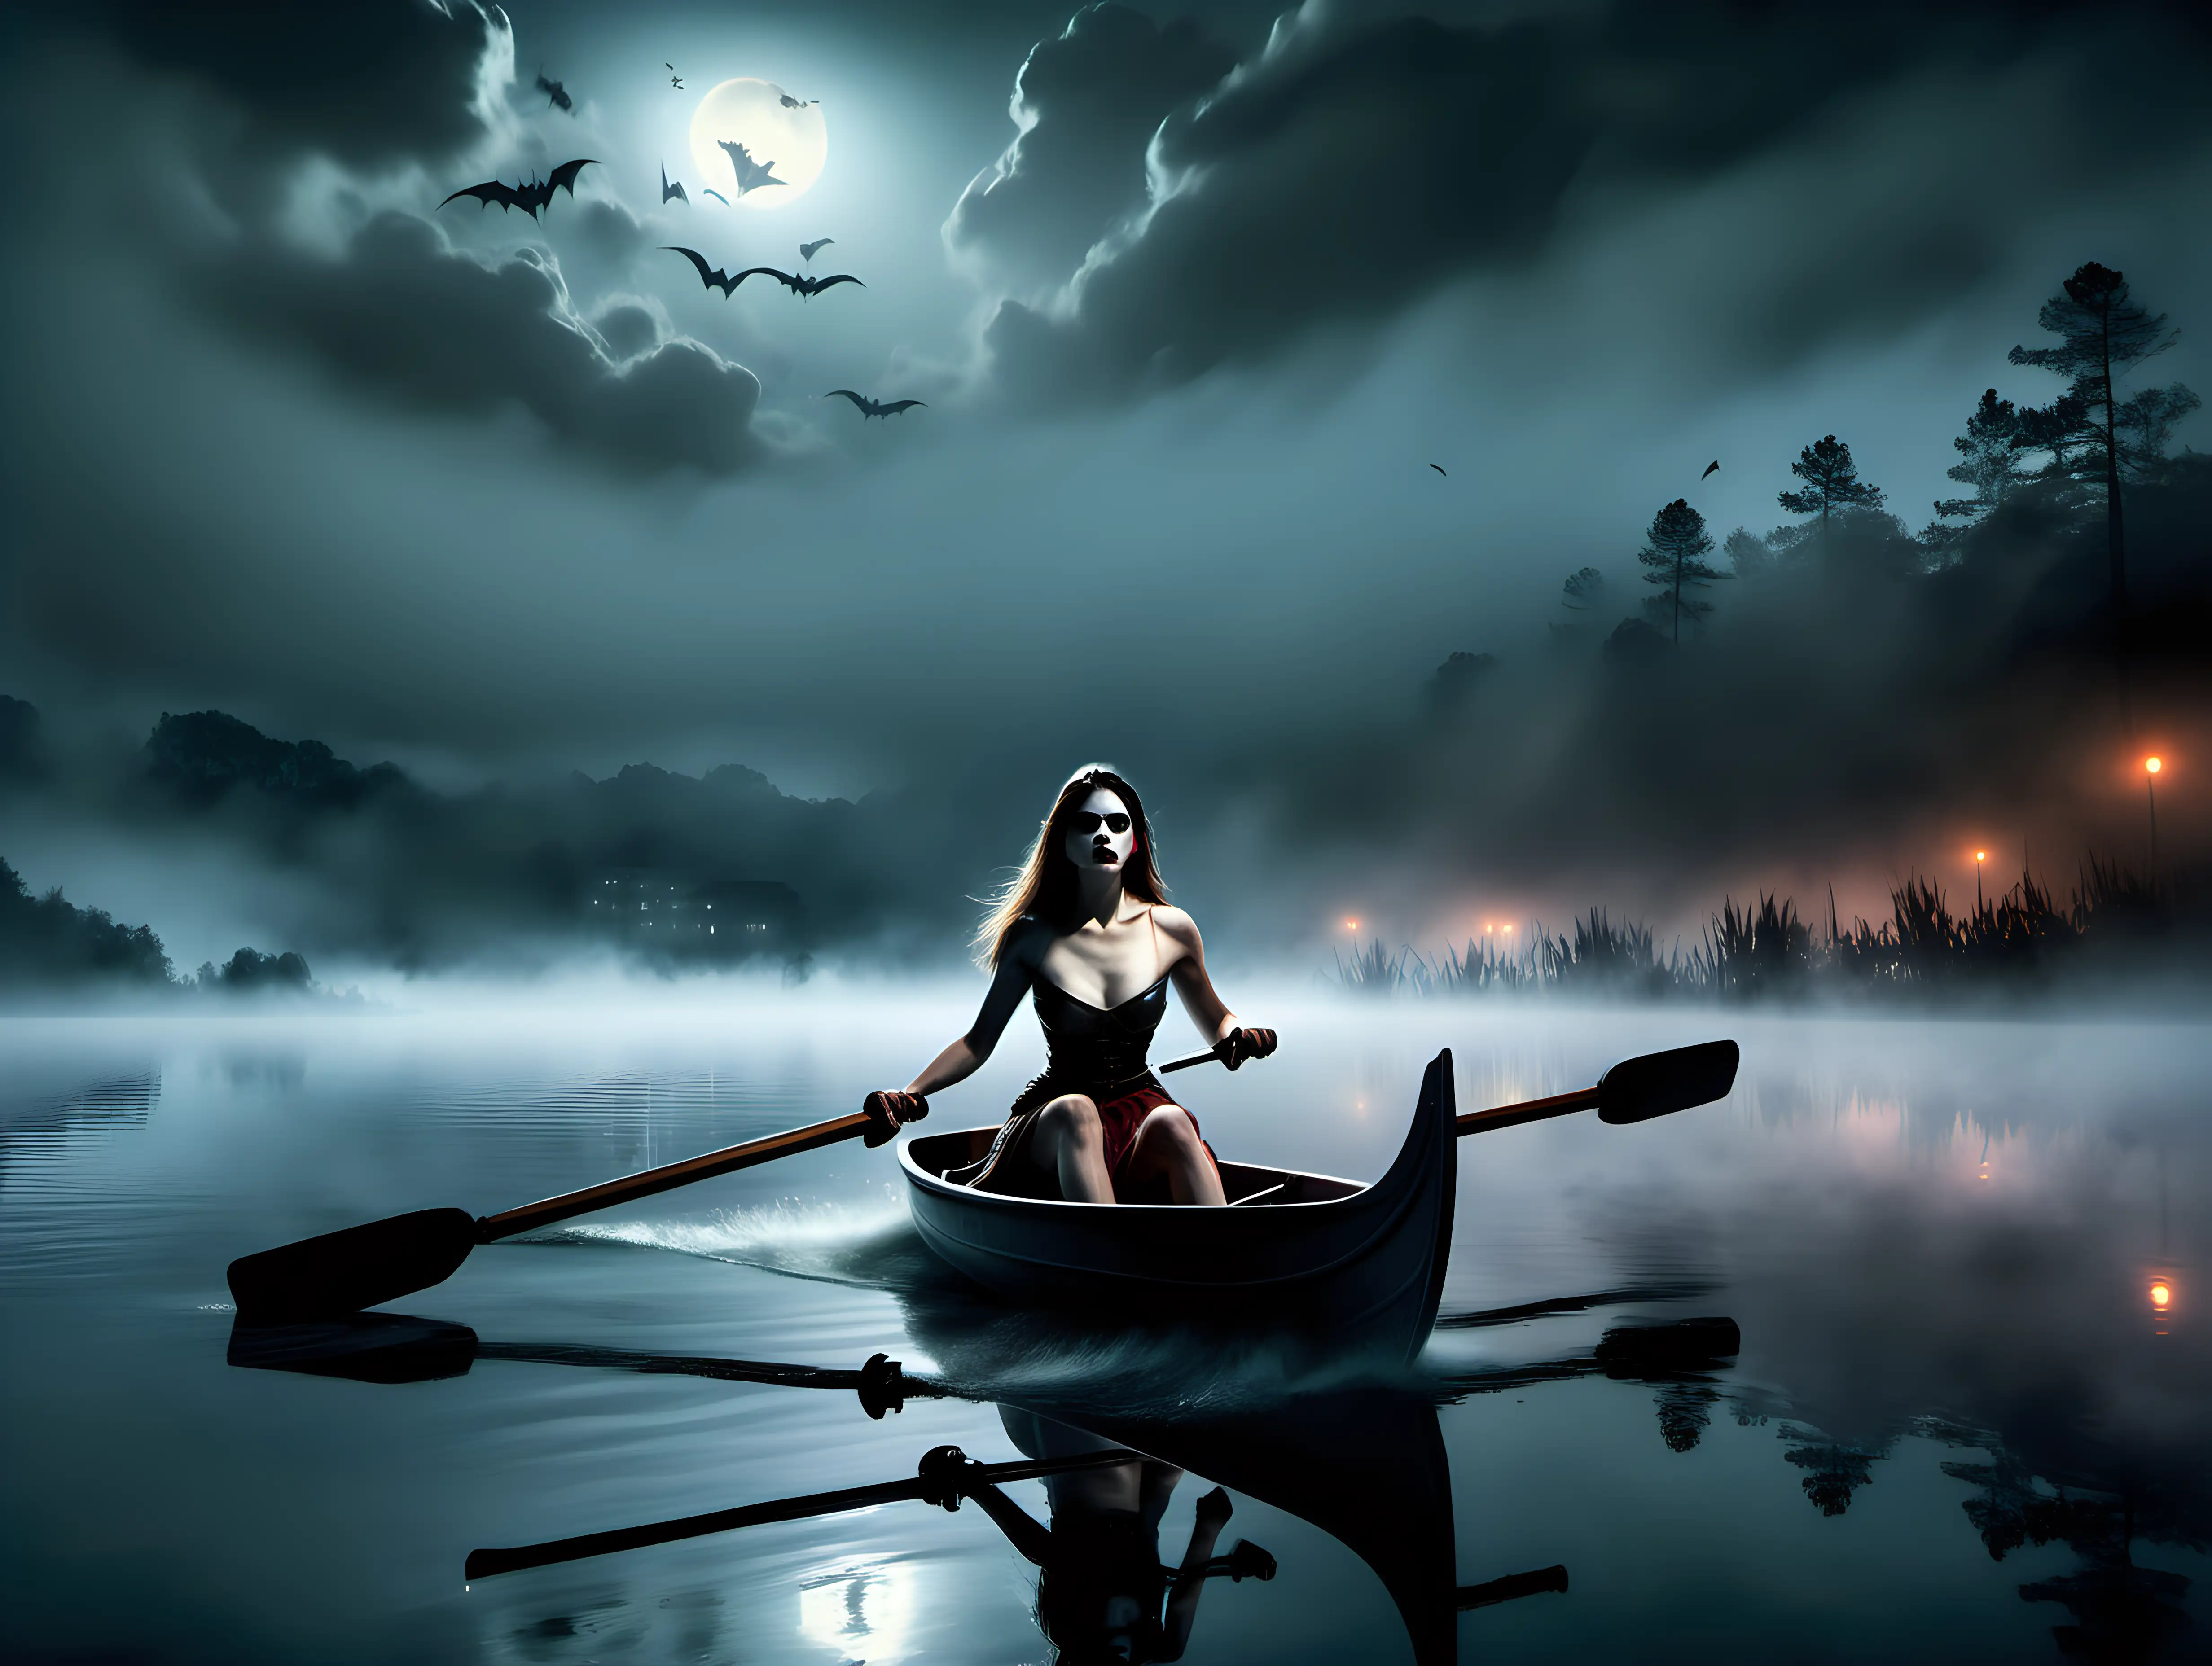 Young woman rowing across a lake late at night in heavy fog with vampire bays hovering overhead closeup photo realistic frank frazetta style